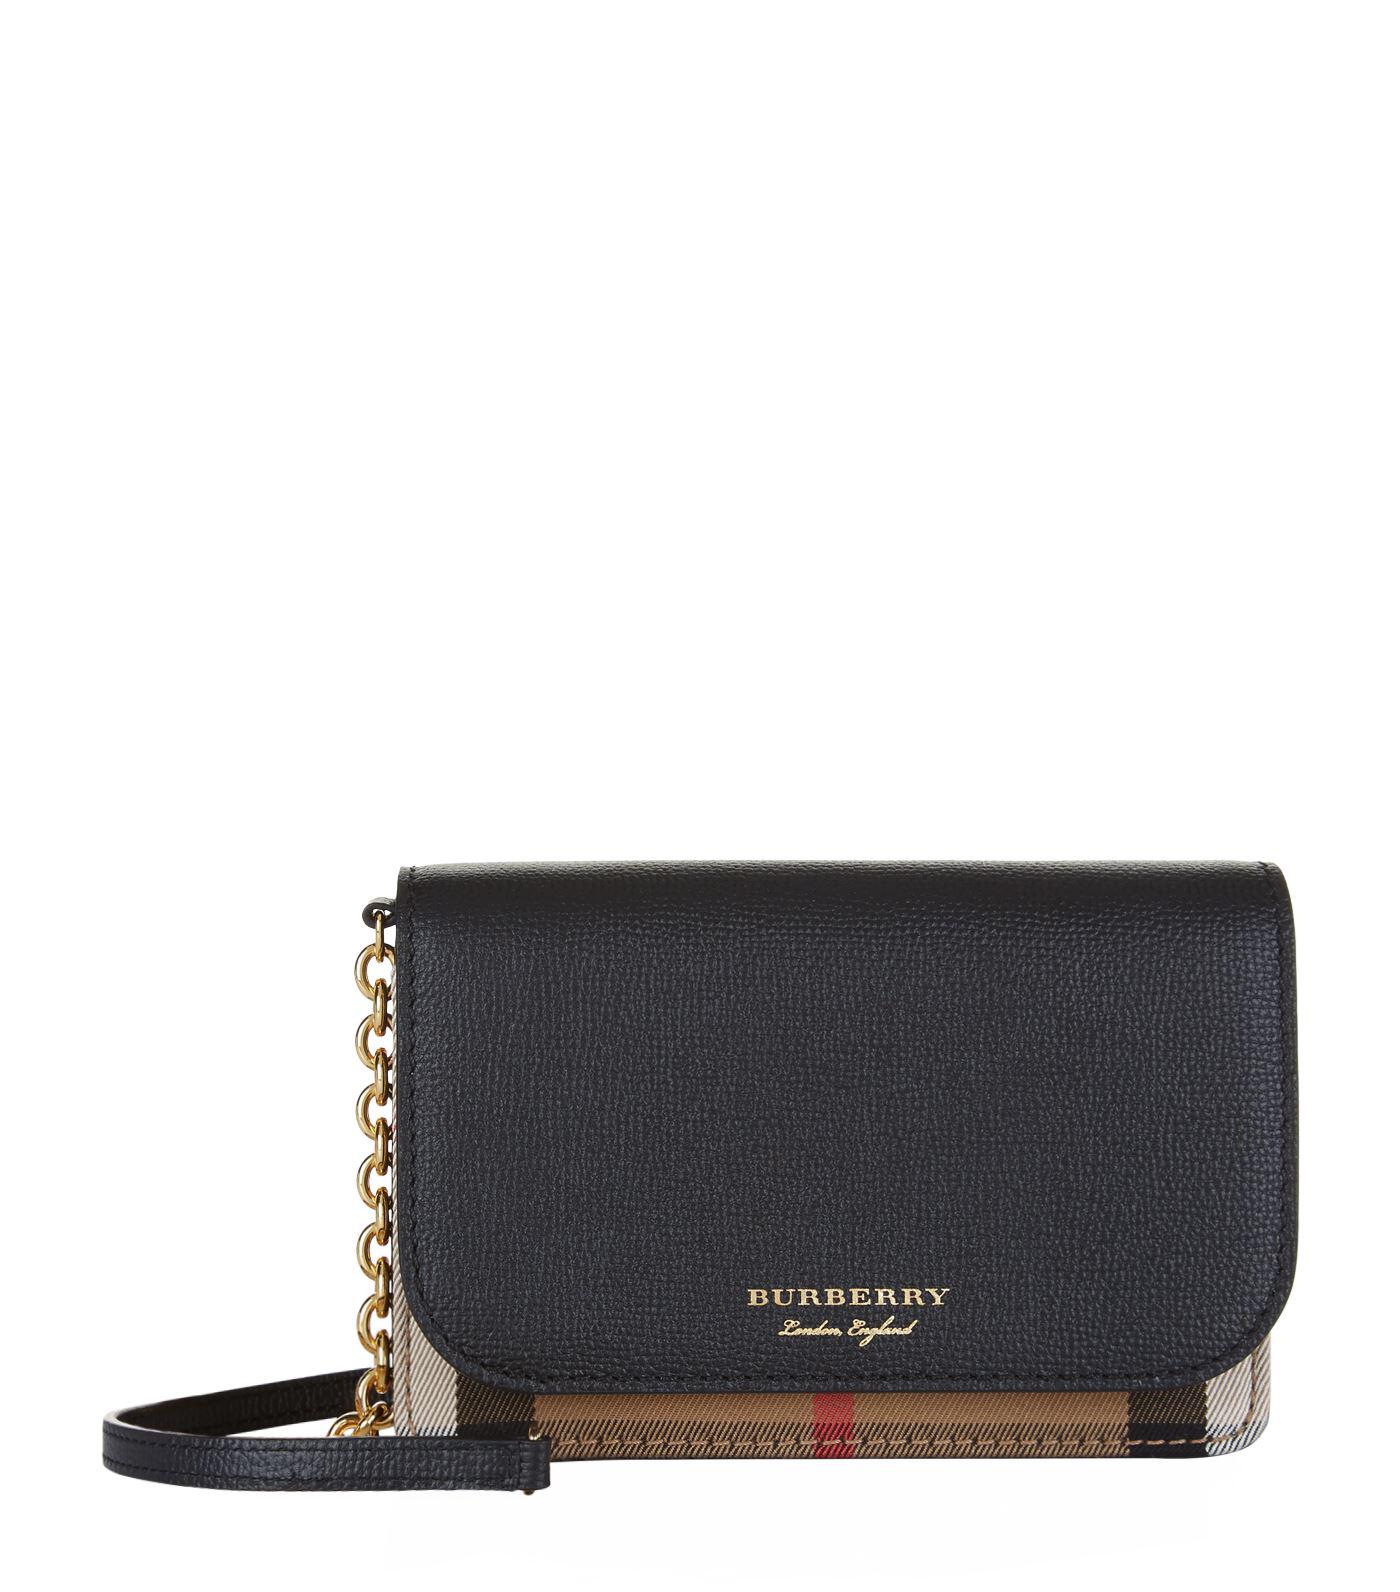 Burberry Leather Hampshire Cross Body Bag in Black | Lyst